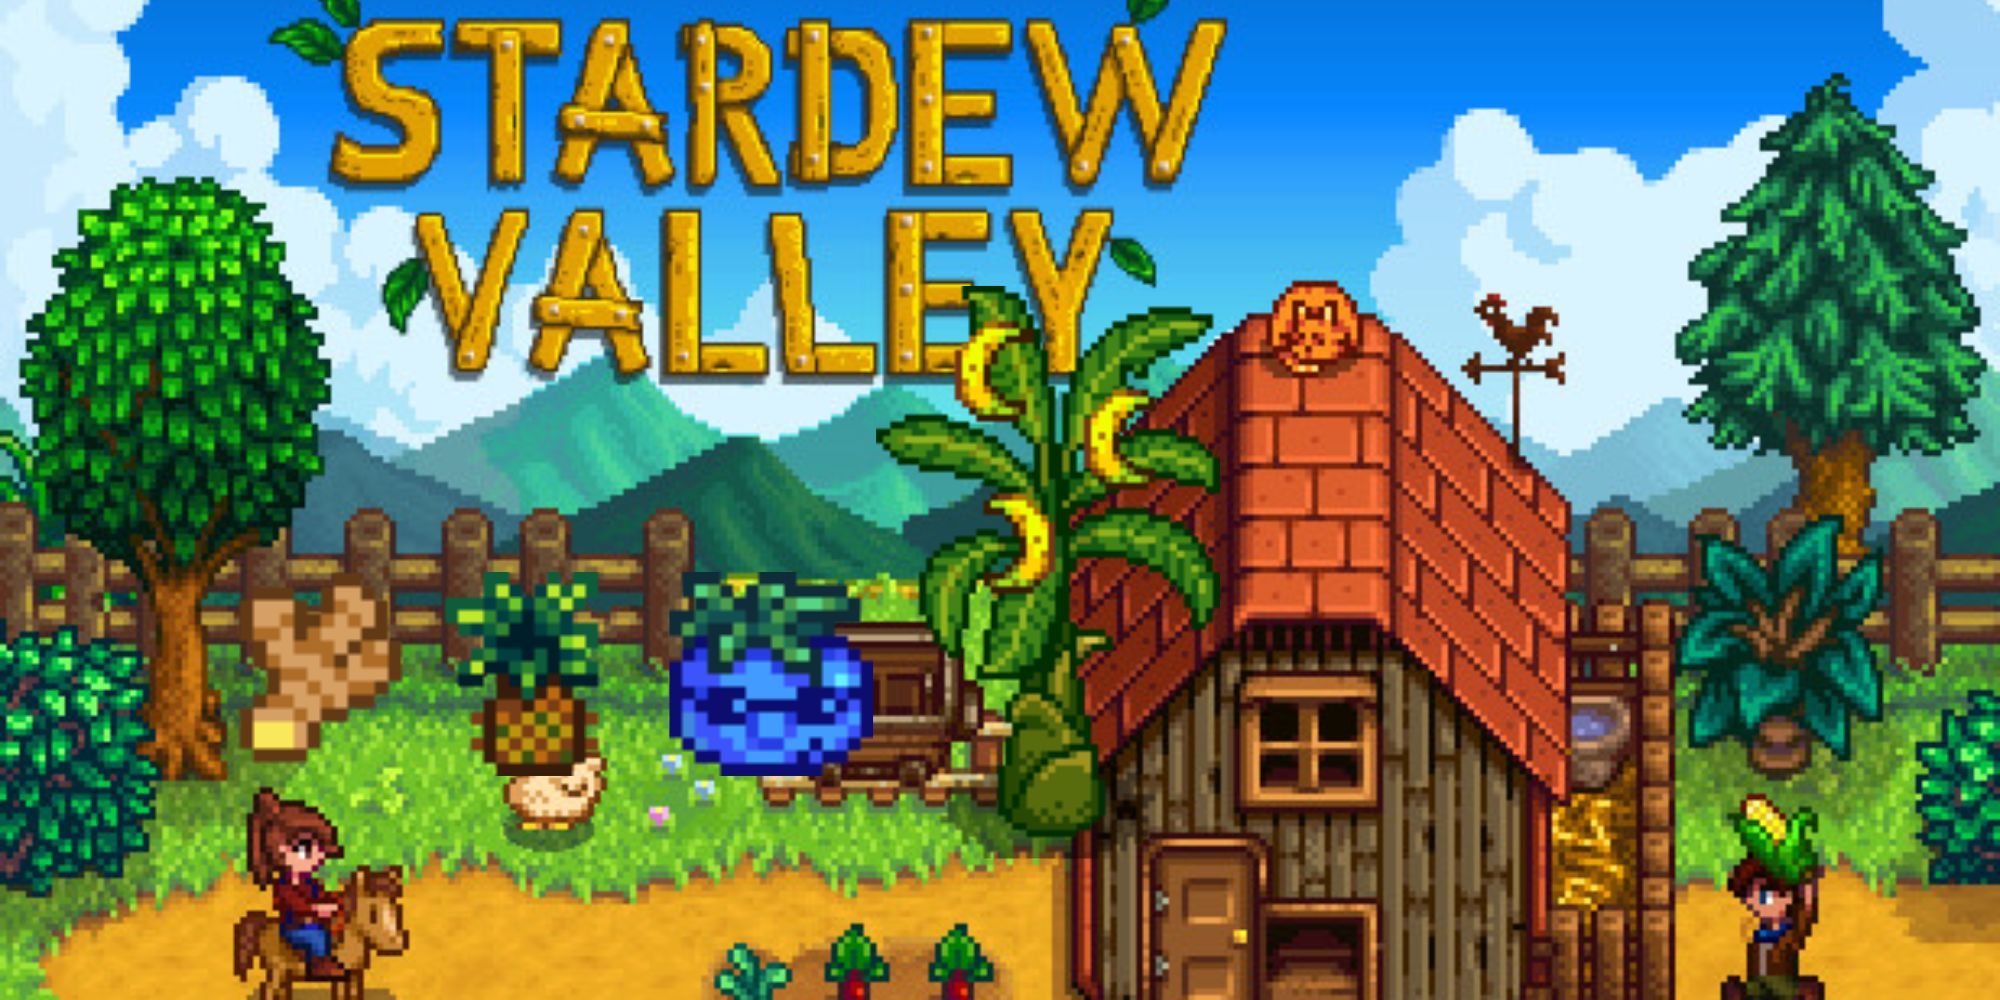 stardew valley all the new crops and trees added in 1.5